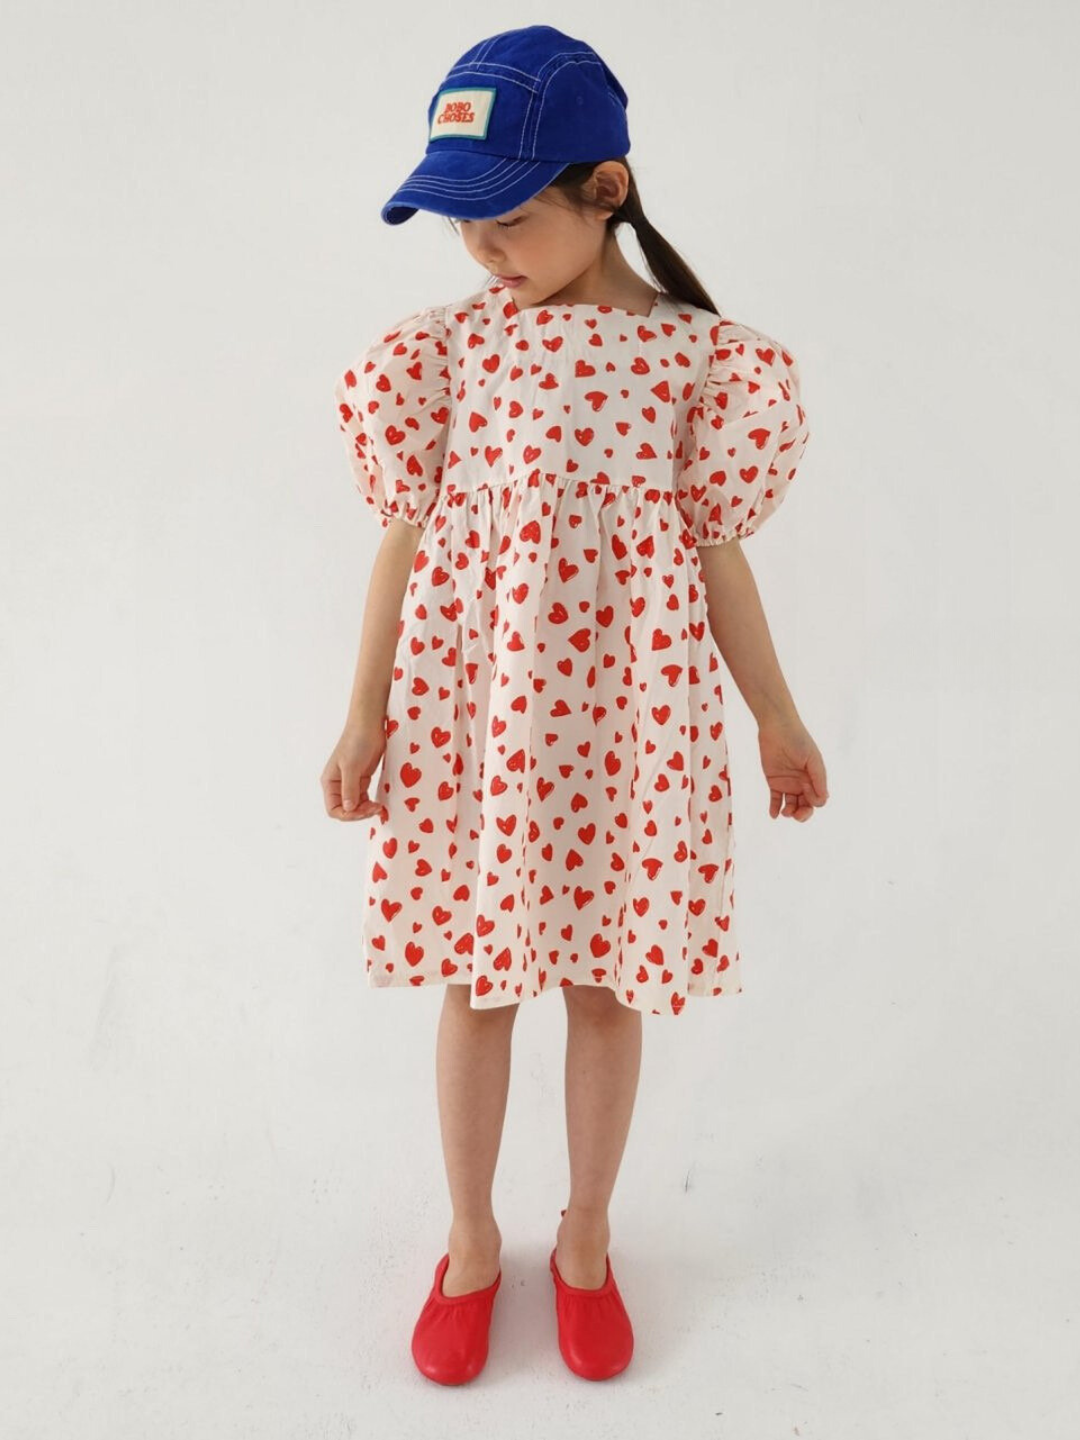 A child wearing a kids' puff-sleeved dress with red hearts on a white background